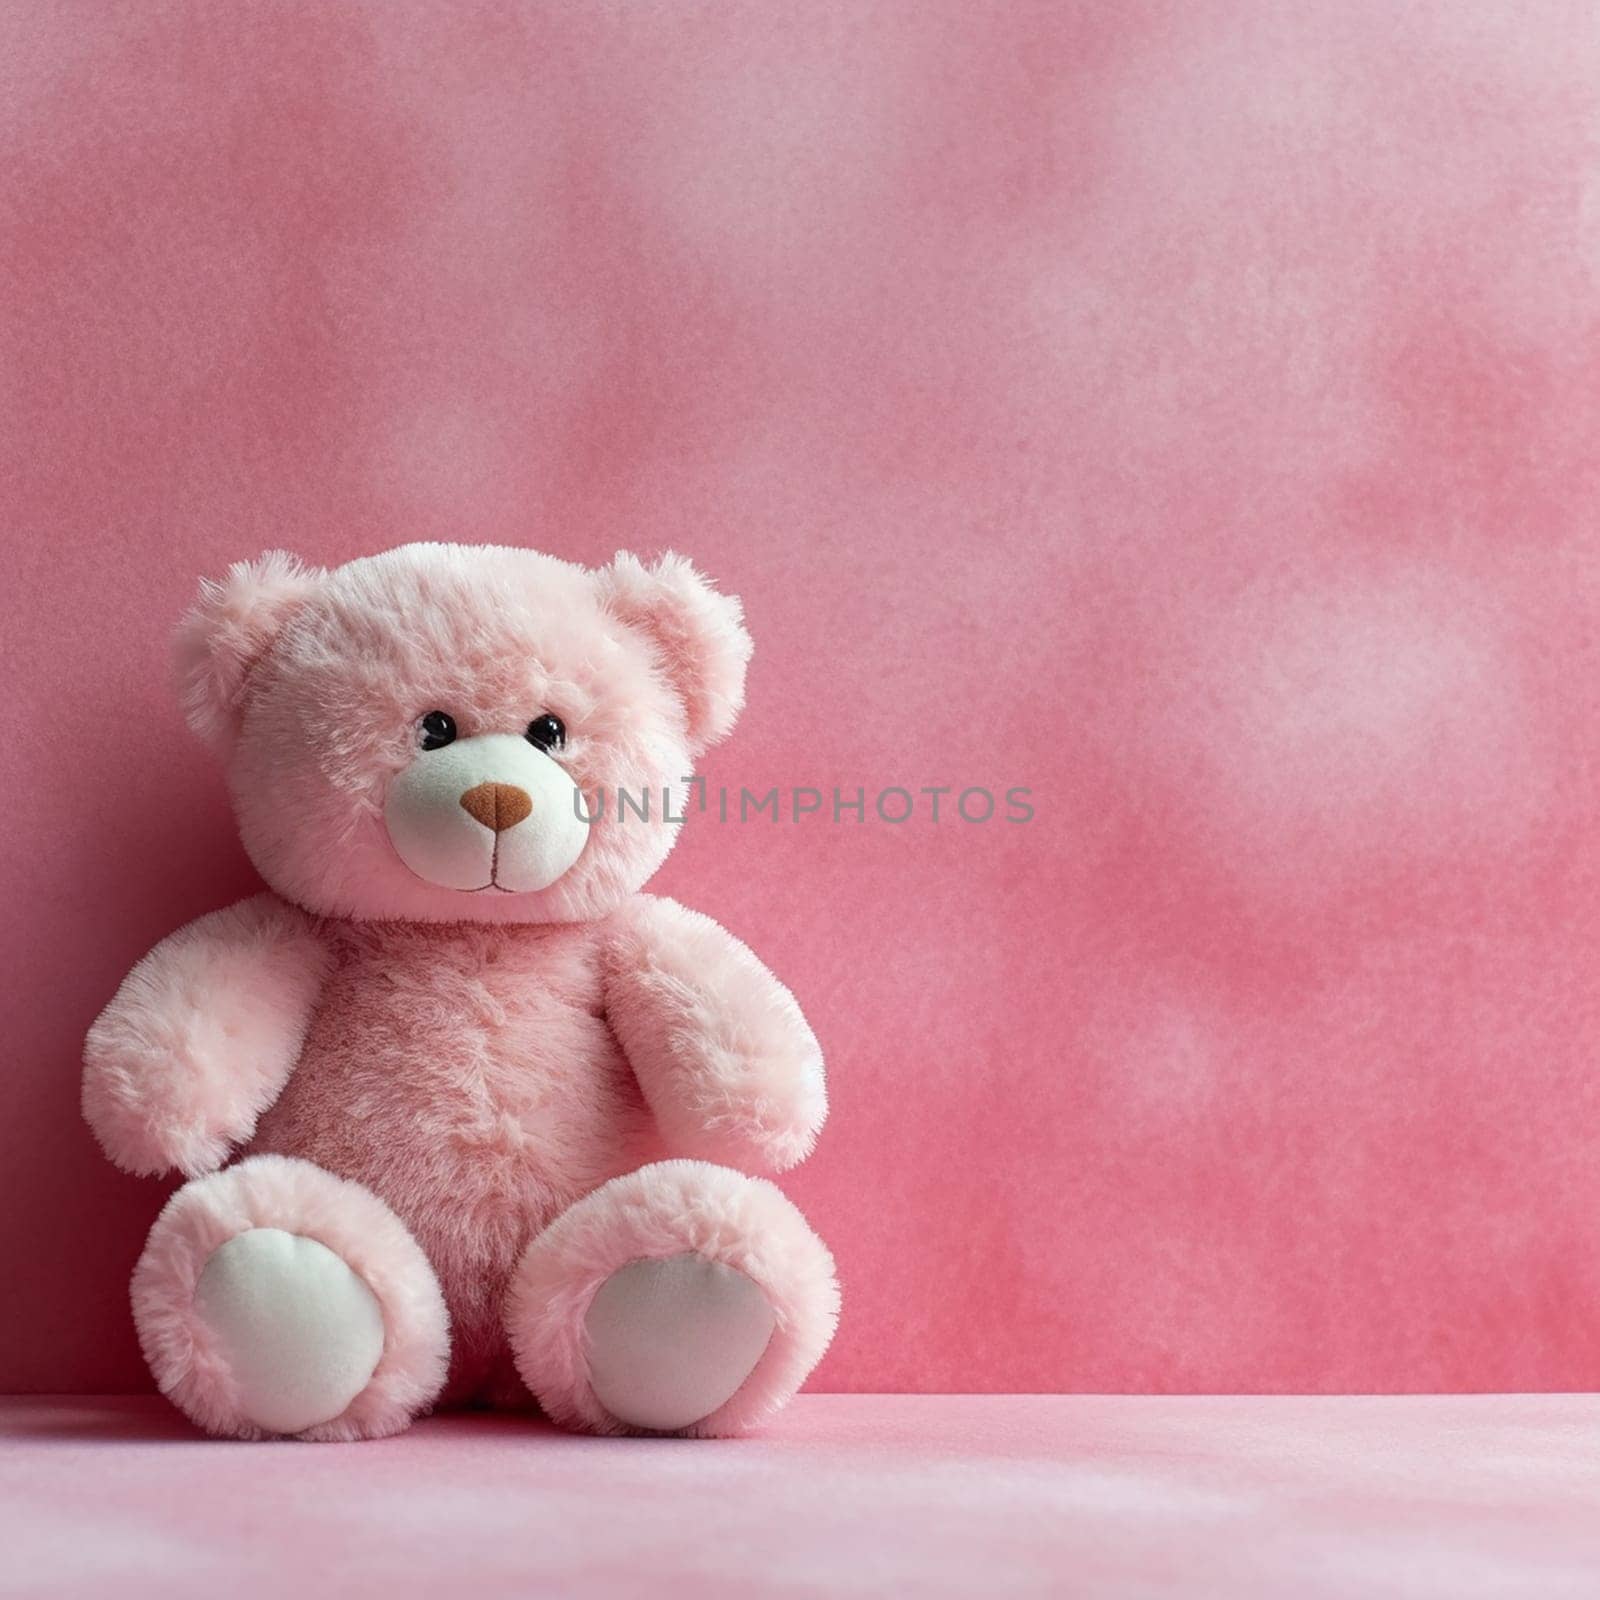 Pink teddy bear sitting against a light pink background. by Hype2art